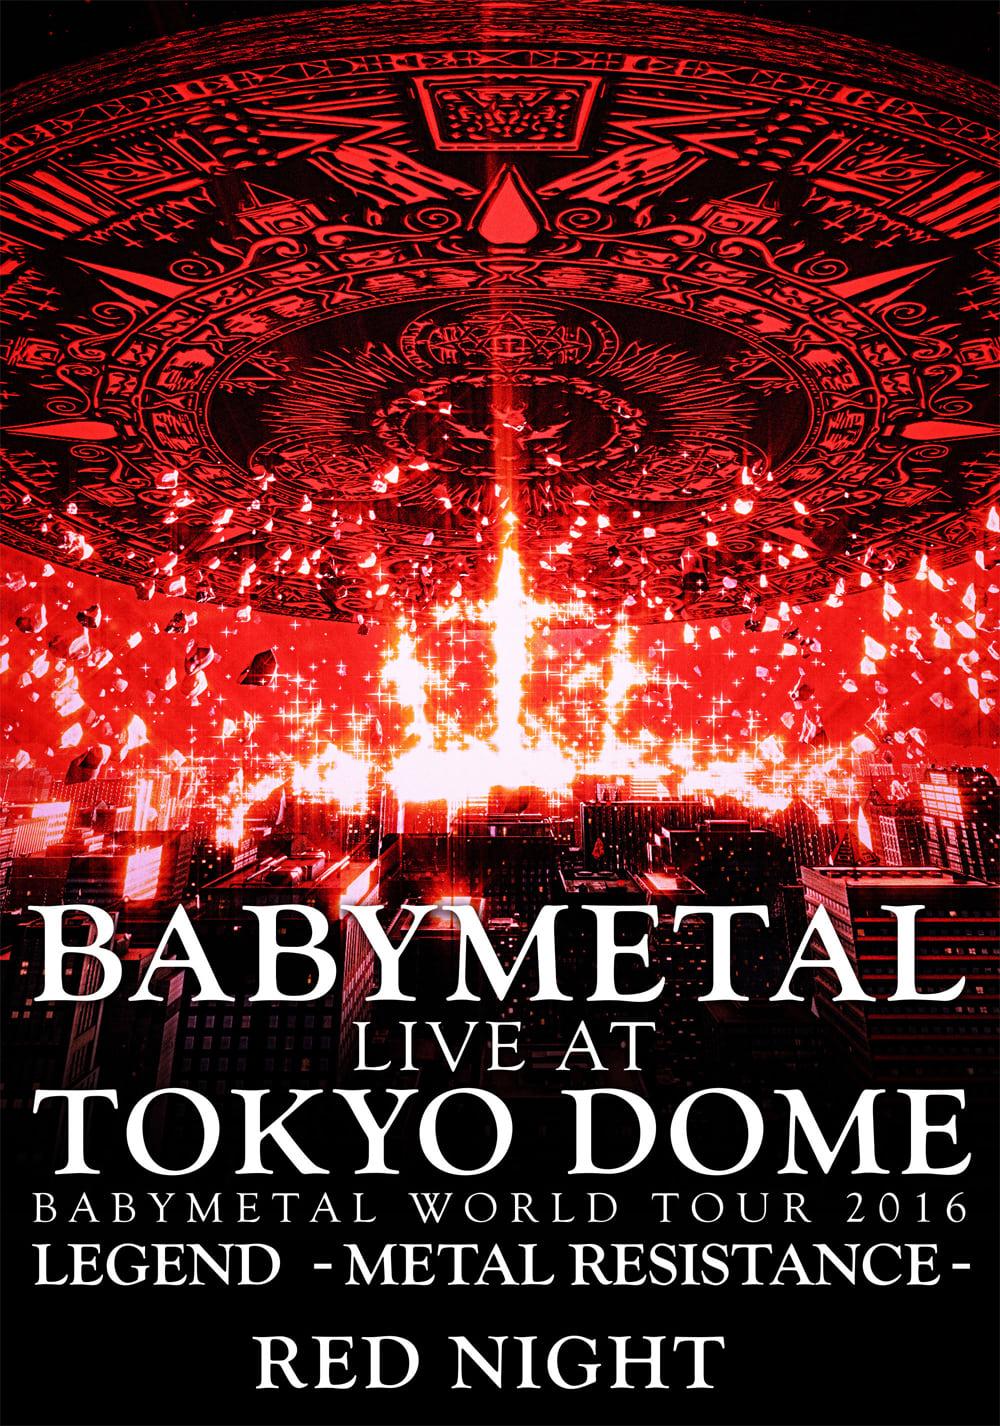 BABYMETAL - Live at Tokyo Dome: Red Night - World Tour 2016 poster